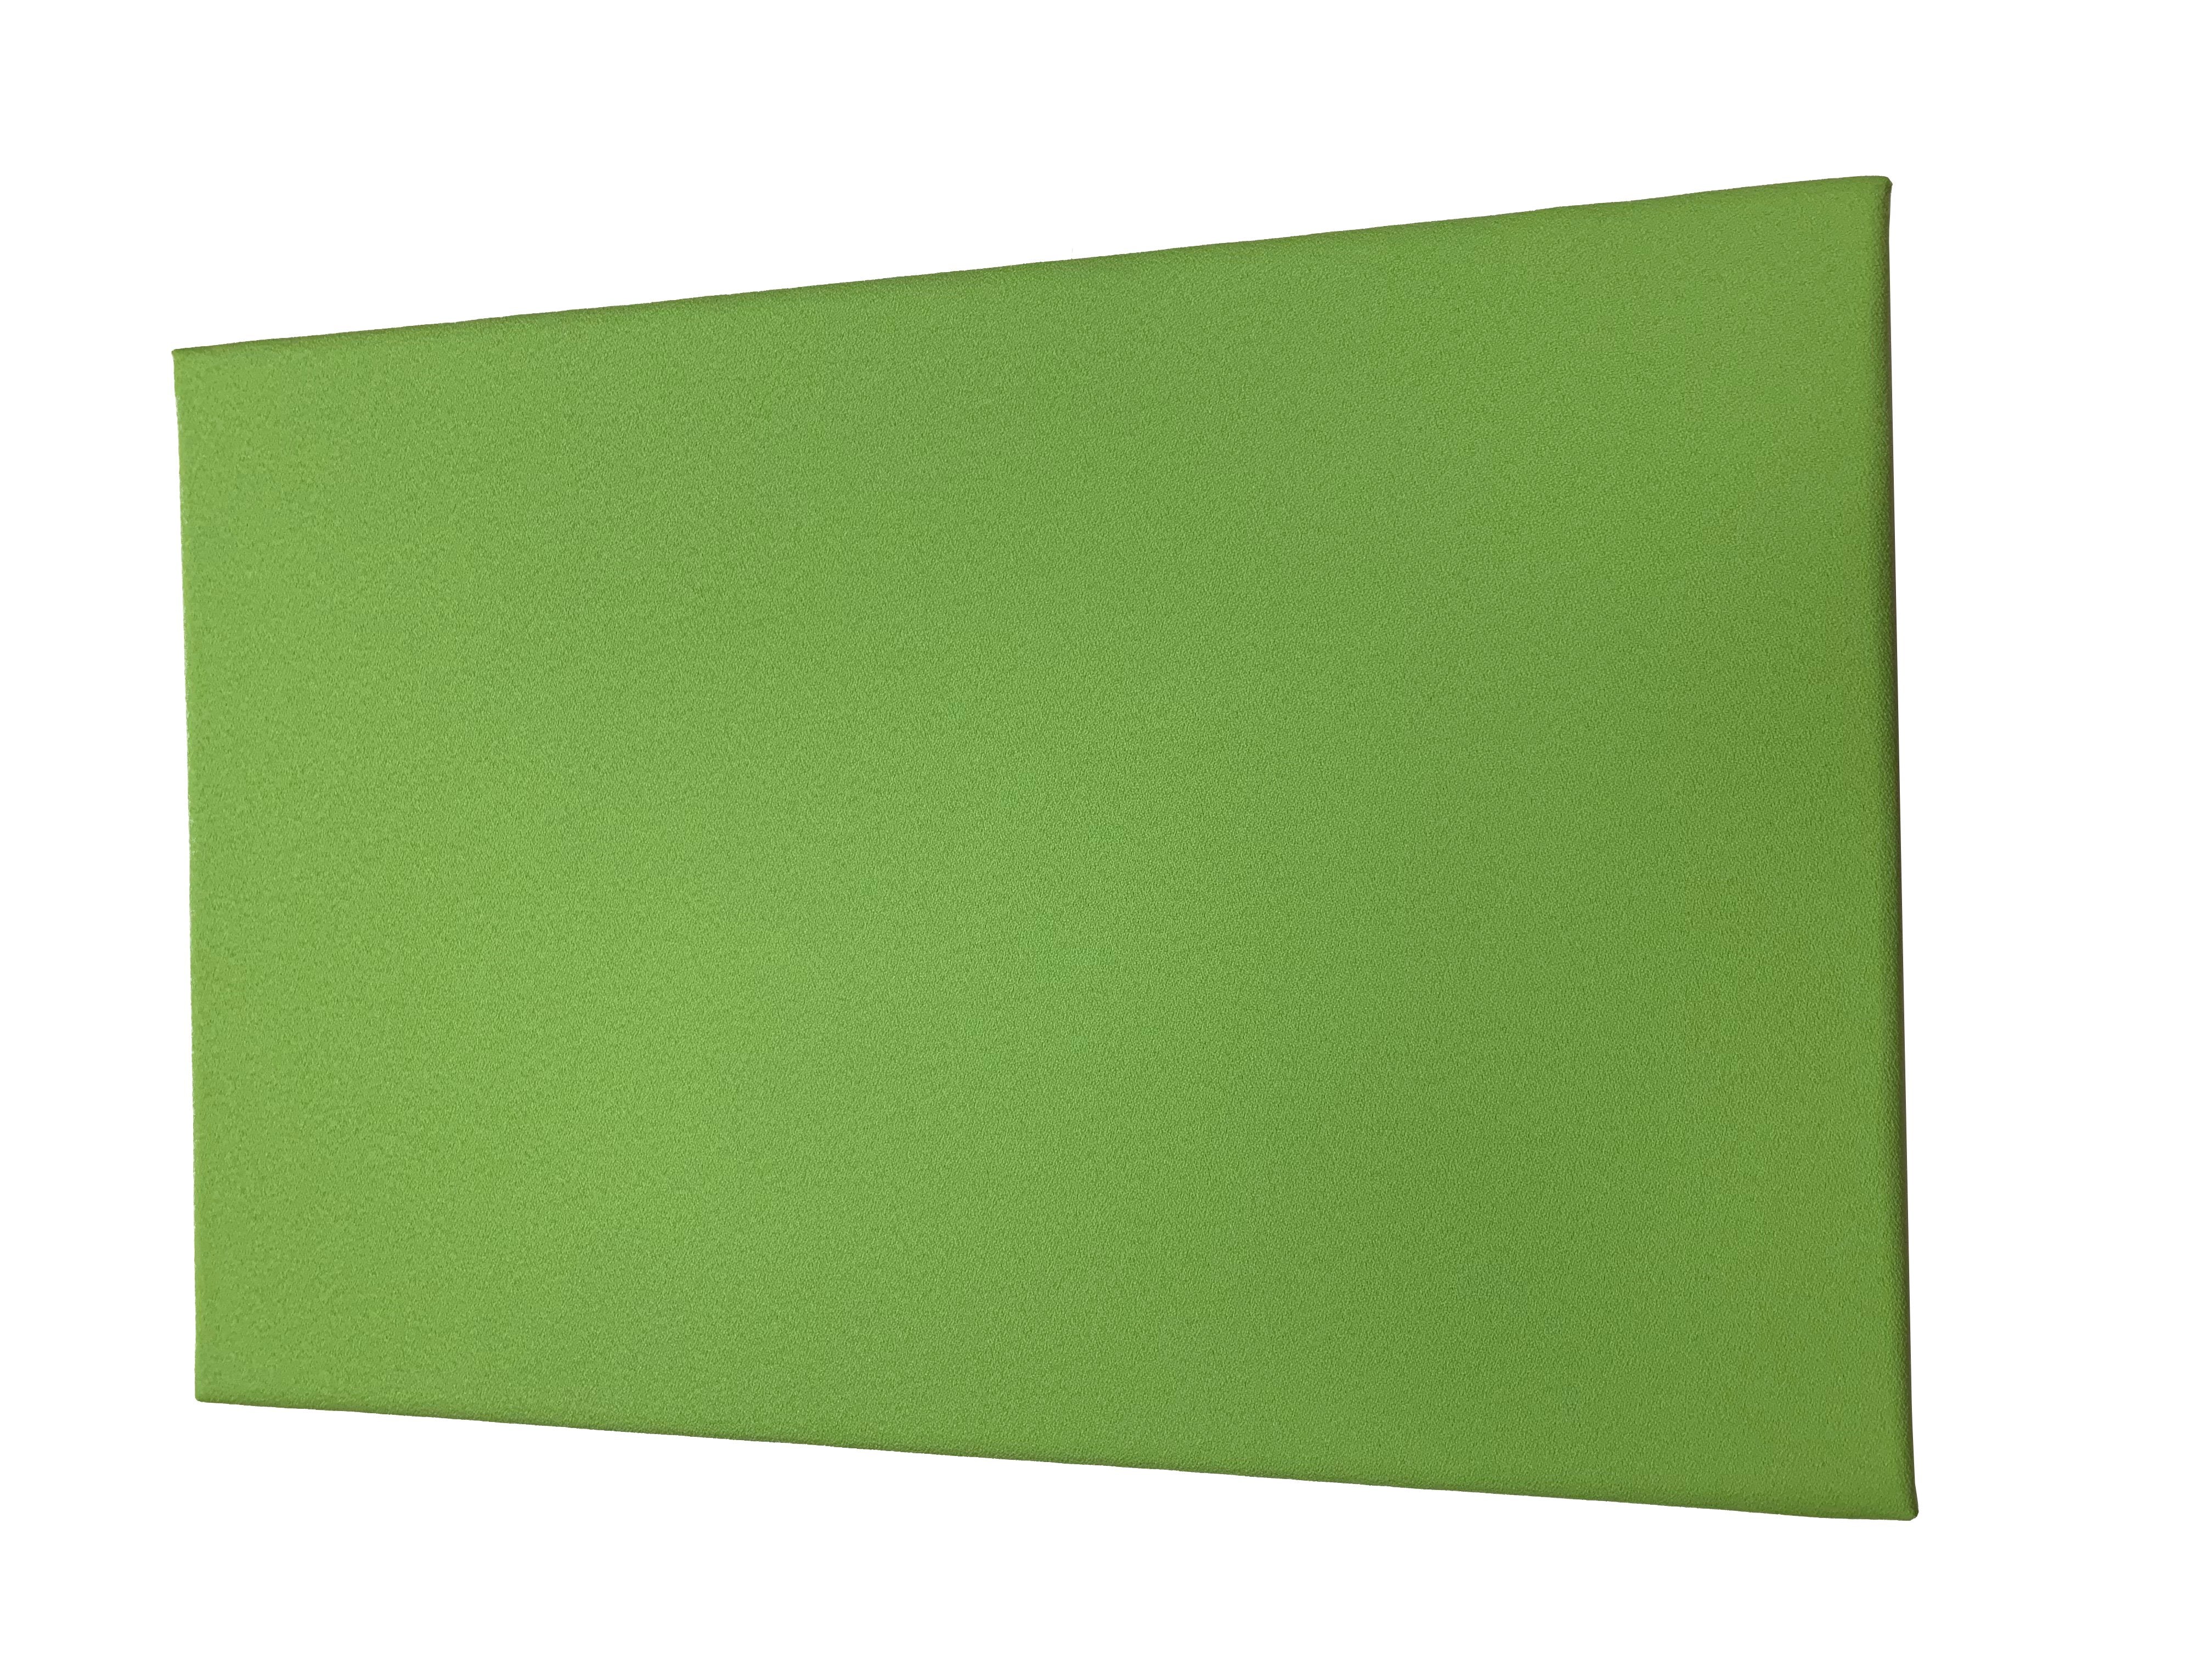 2" SoundControl Ceiling Mounted Acoustic Panel 2ft by 3ft - Advanced Acoustics